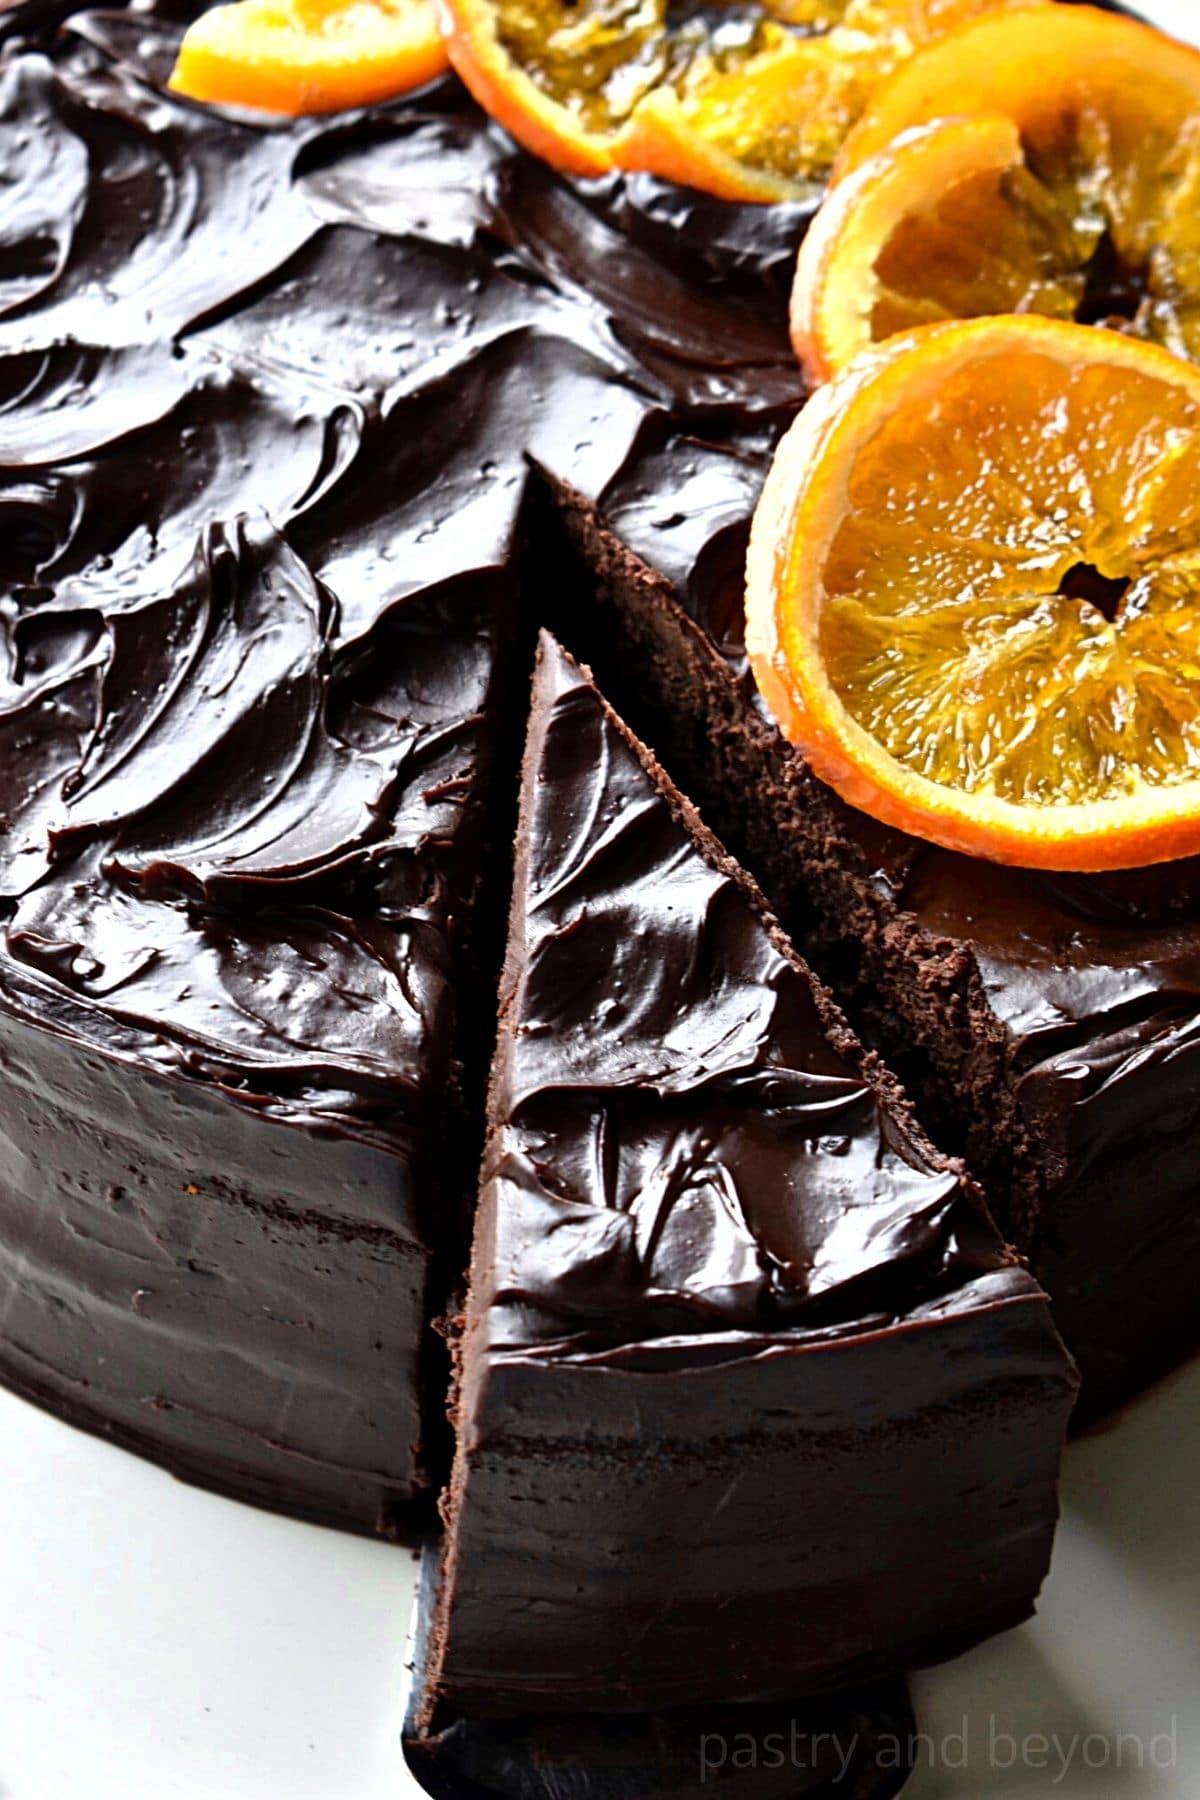 Chocolate orange cake with candied orange slices on top.